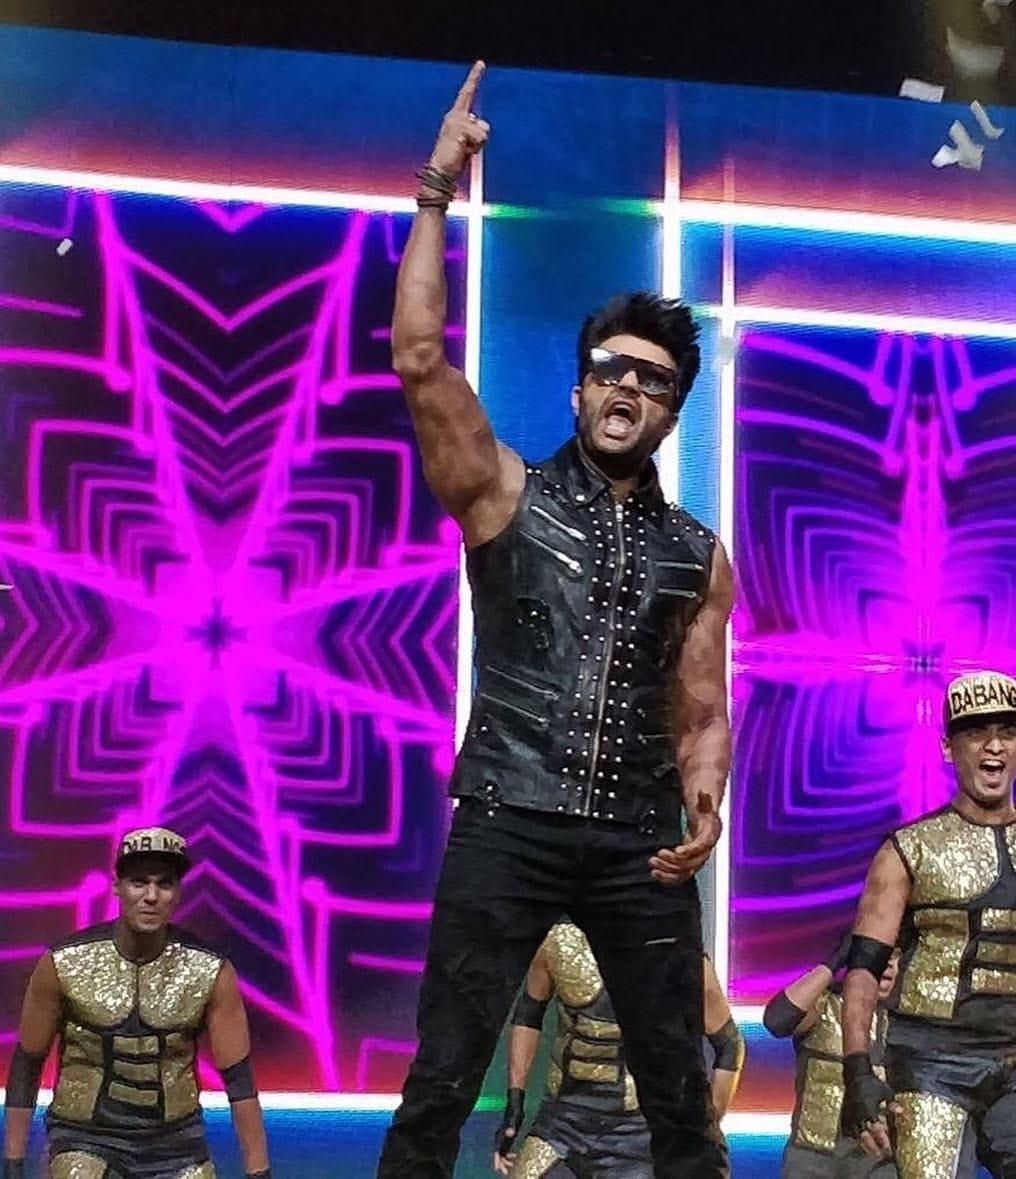 #Dabanggtour: Funny man Maniesh Paul takes over the crowd with his HOT-BOD and slick moves!